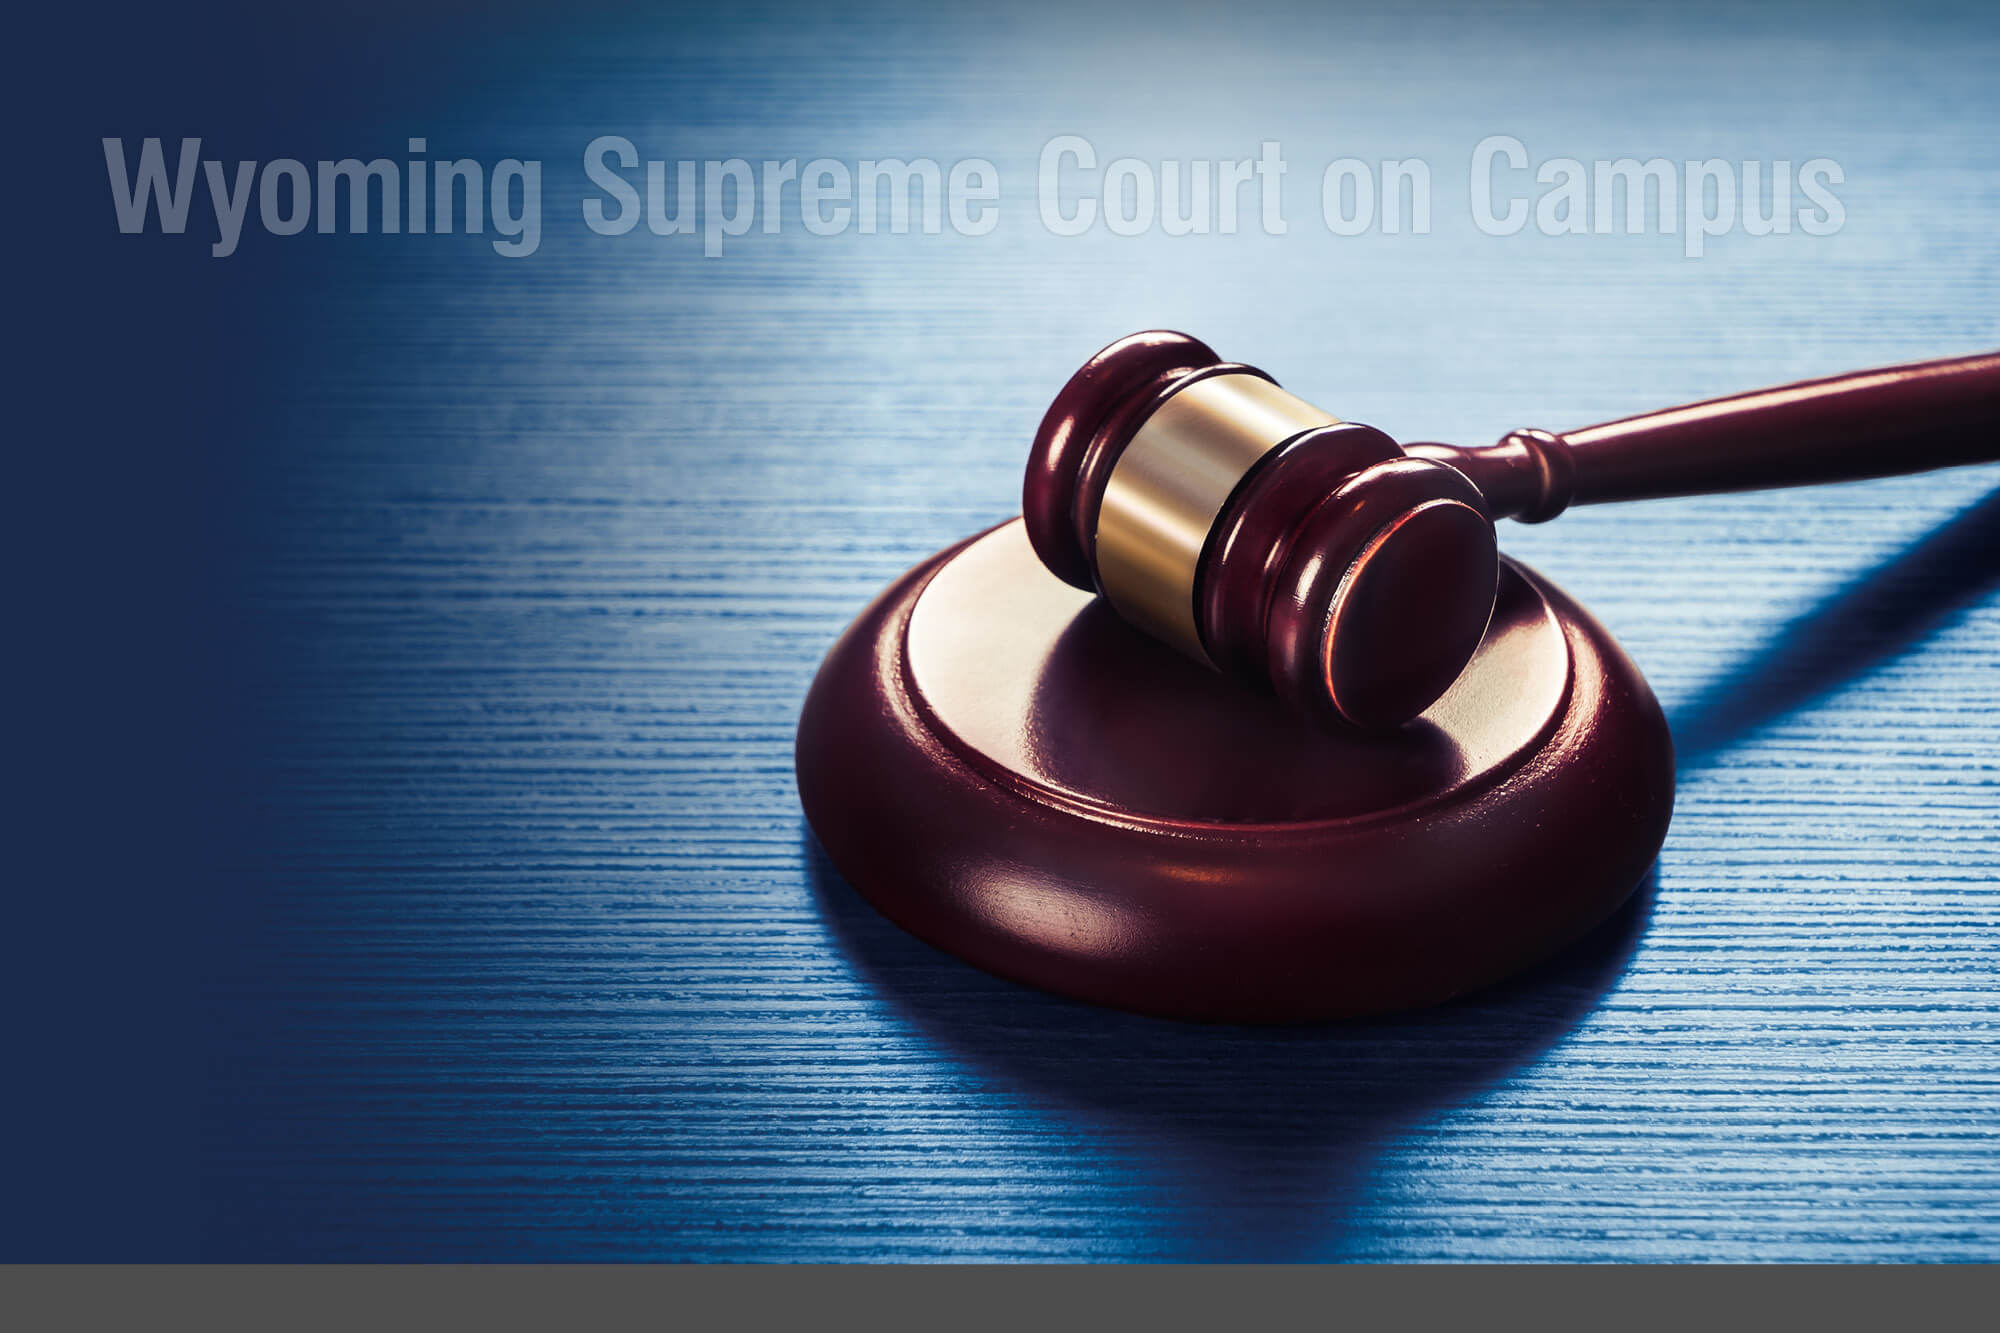 Image for the Wyoming Supreme Court event at Casper College.